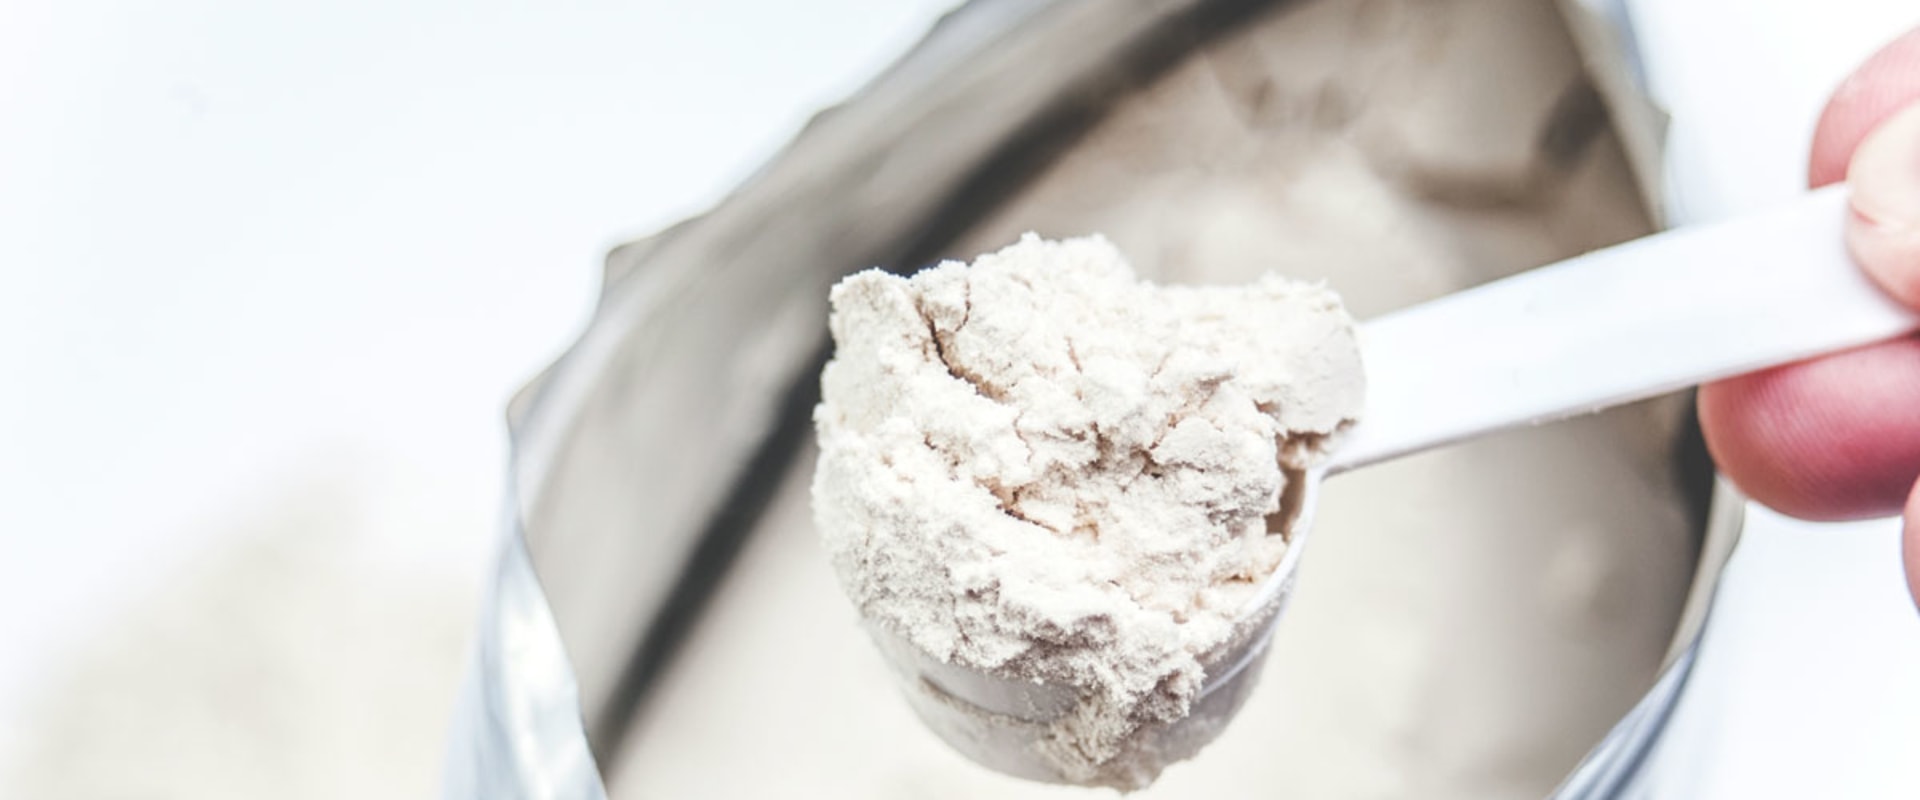 Do Protein Powders Have Artificial Sweeteners?